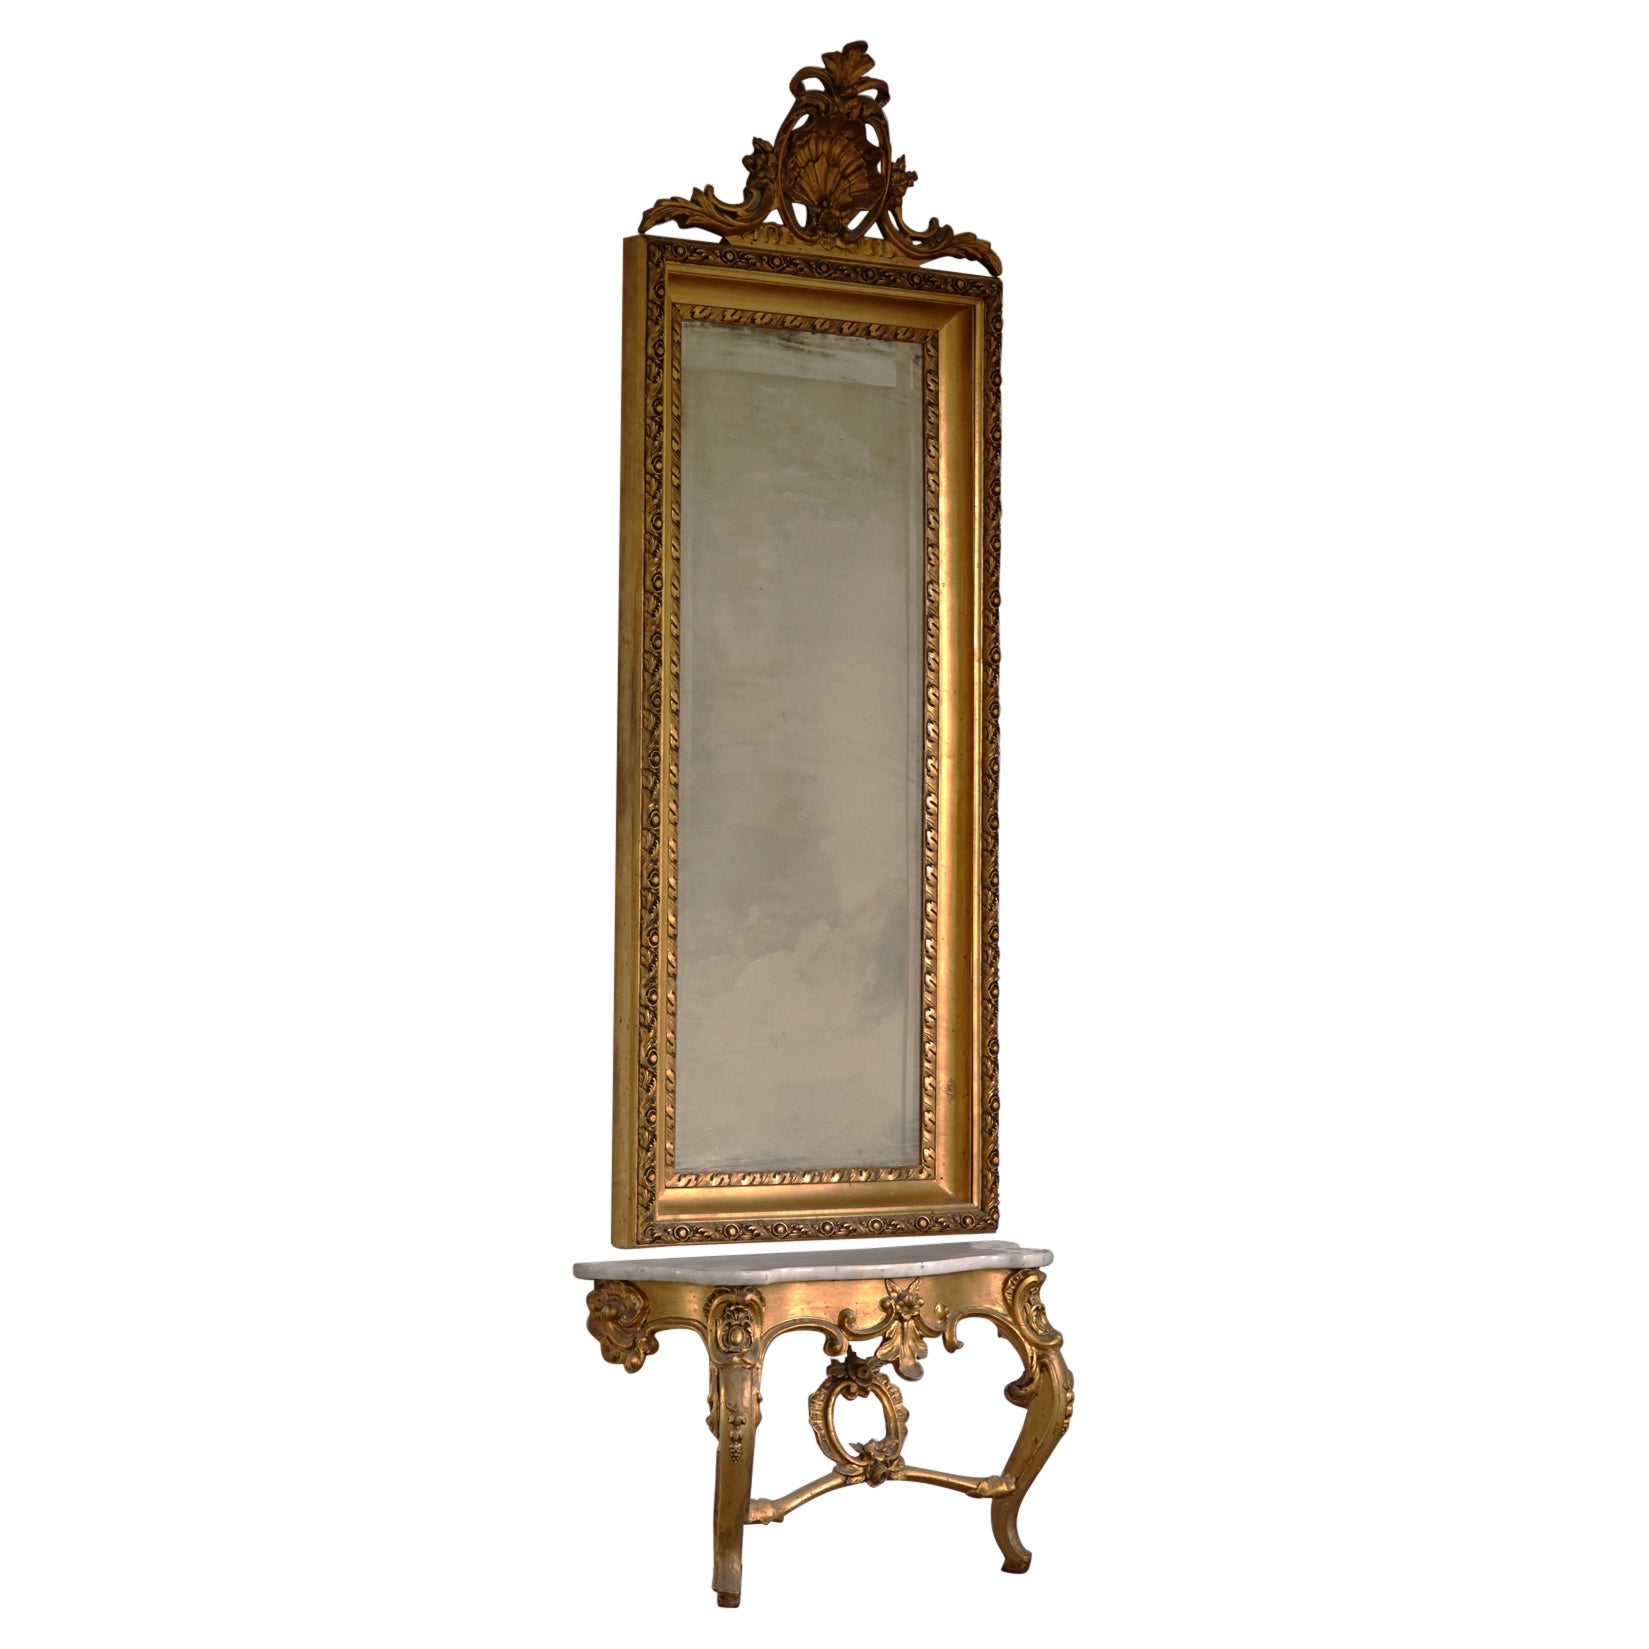 Antique Danish Mid-19th Century Rococo Gold Plated Mirror For Sale